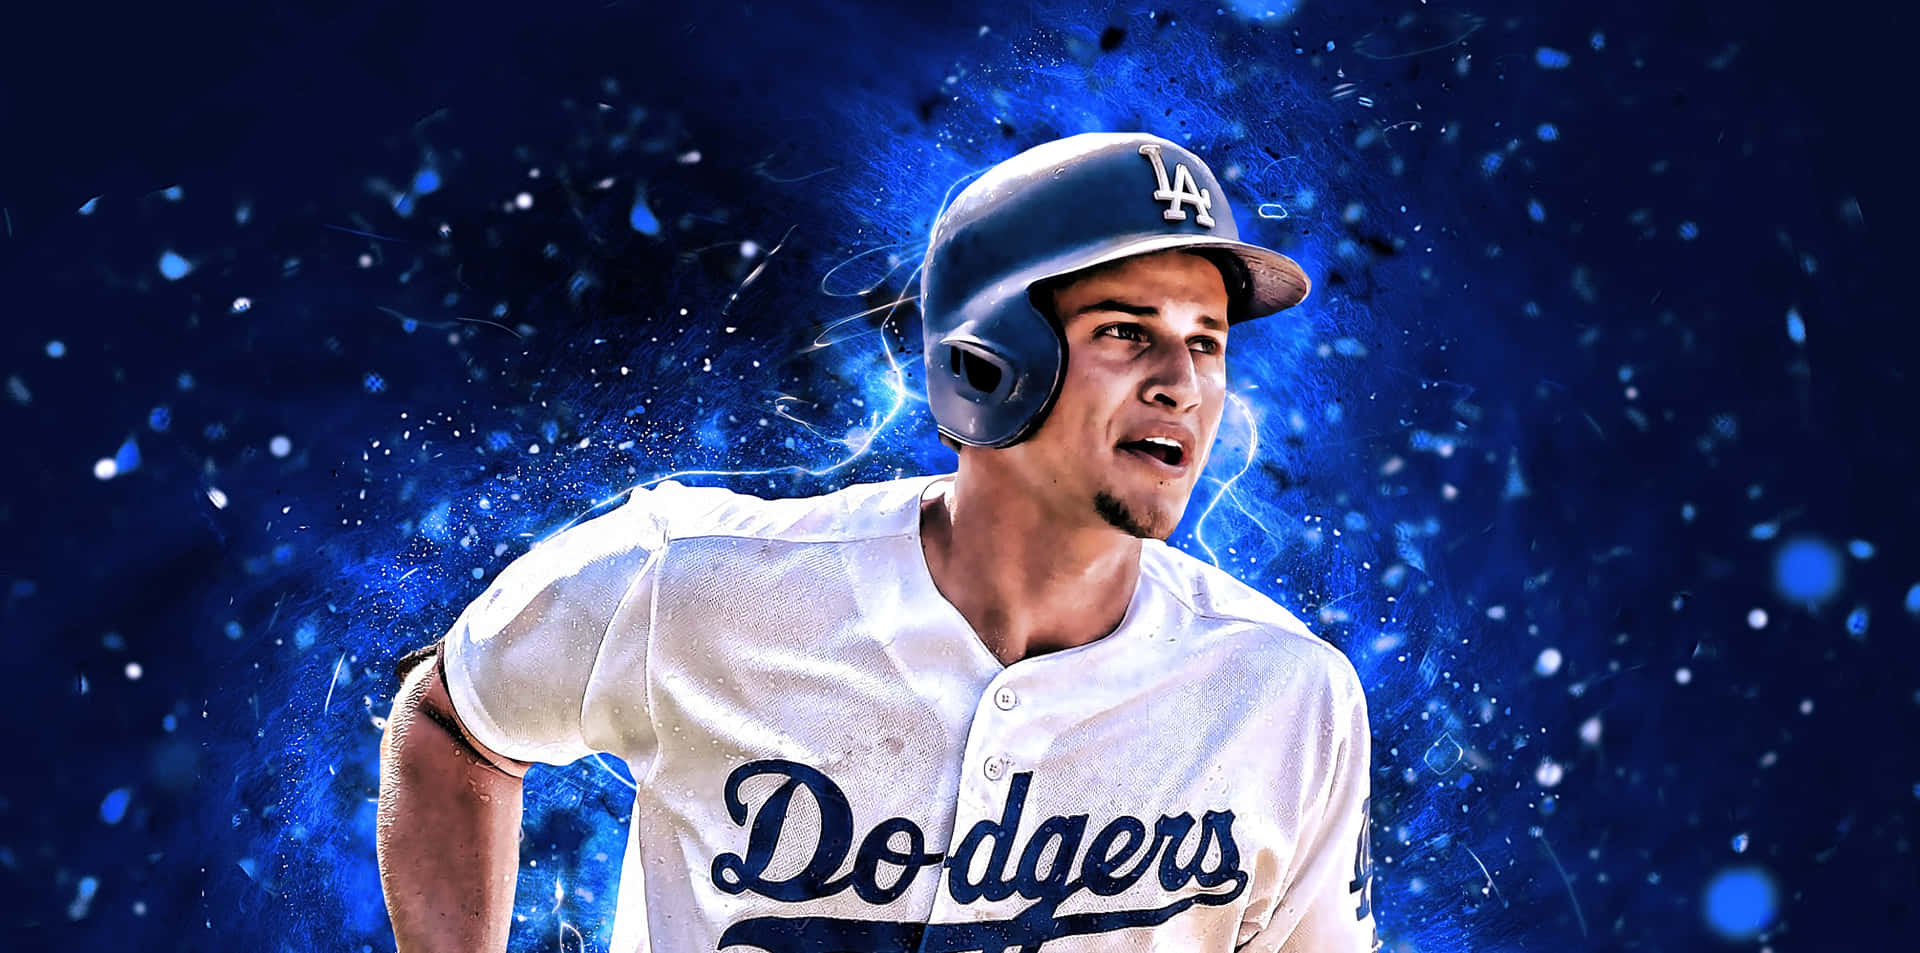 Dynamic Dodgers Player Artistic Background Wallpaper